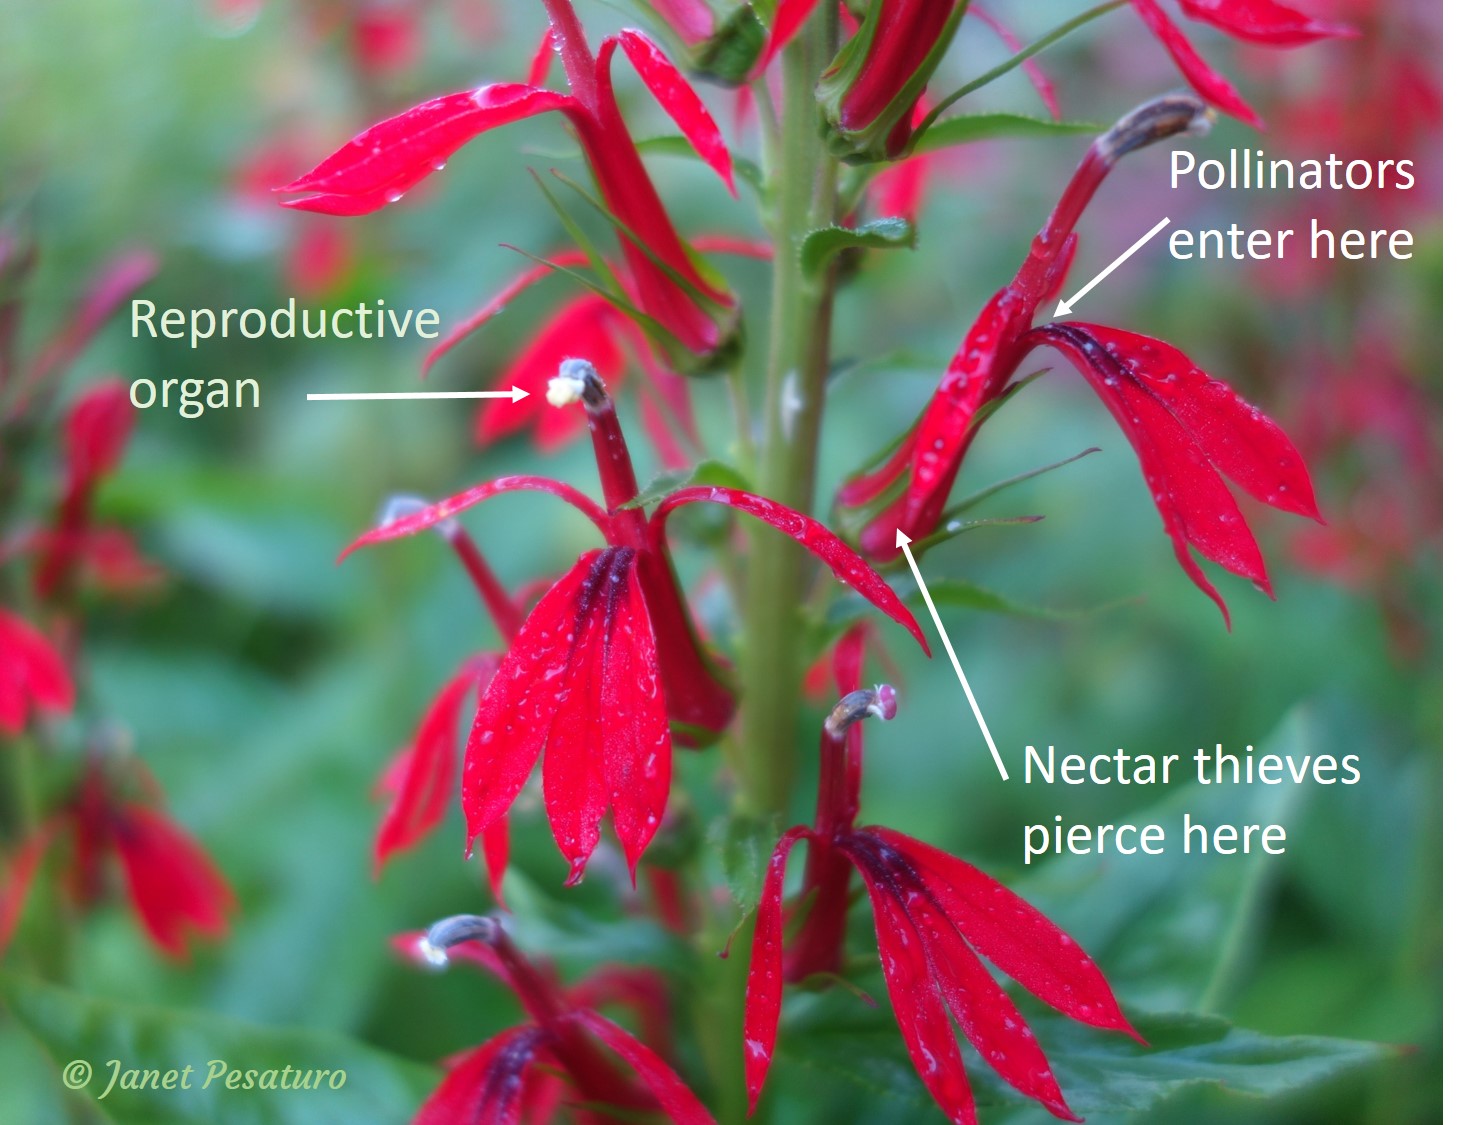 Cardinal flower anatomy, showing where hummingbird nectar thieves and where pollinators enter the flowers to obtain nectar.